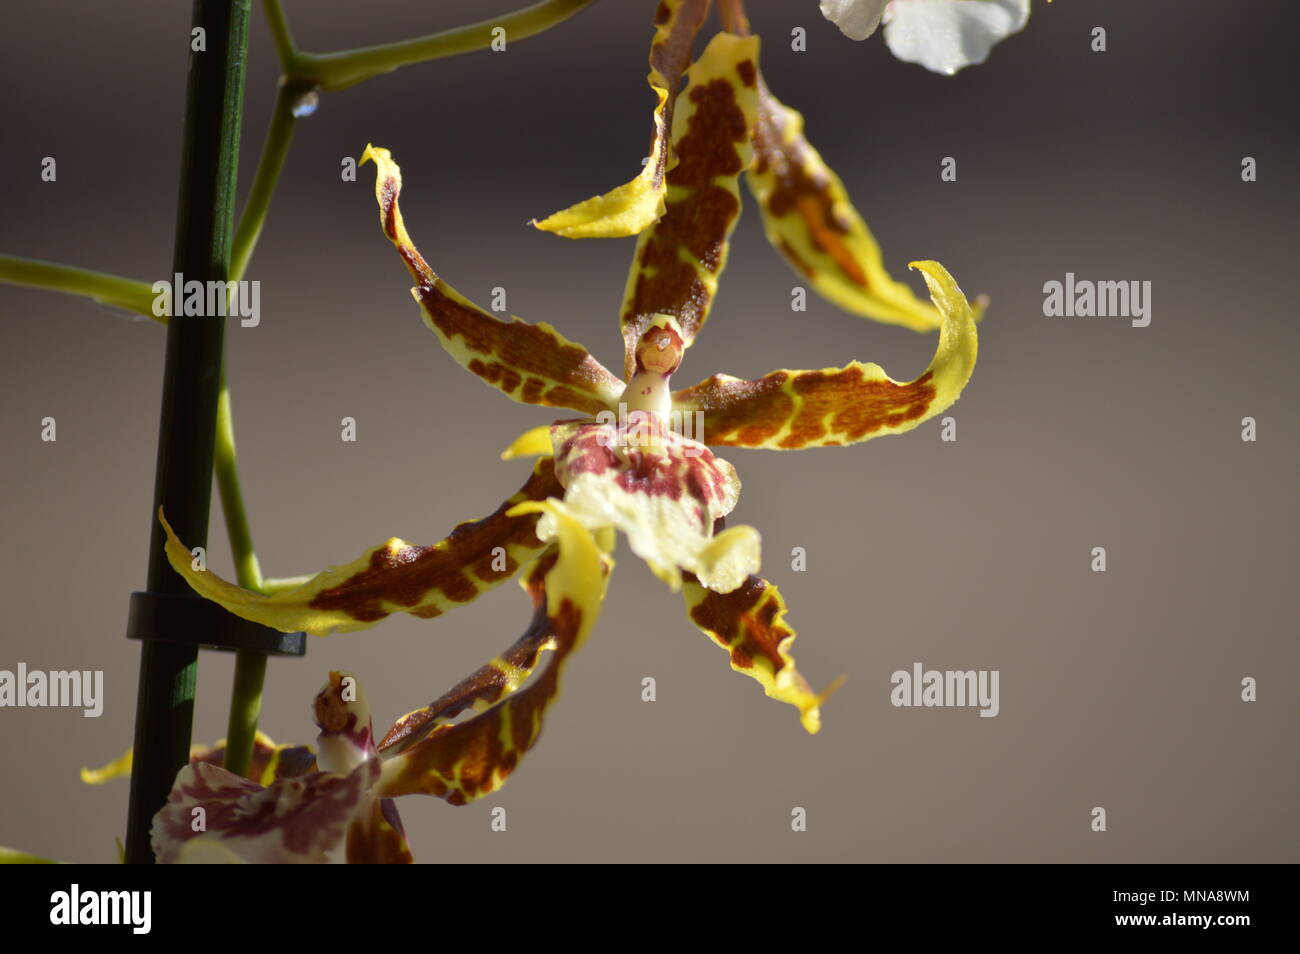 Orchid Brassia Tessa Yellow And Brown Photograph Of A Single Flower. Nature Orchid Botanica Biology Phytology Flowers Plants. May 5, 2018. Madrid Spai Stock Photo